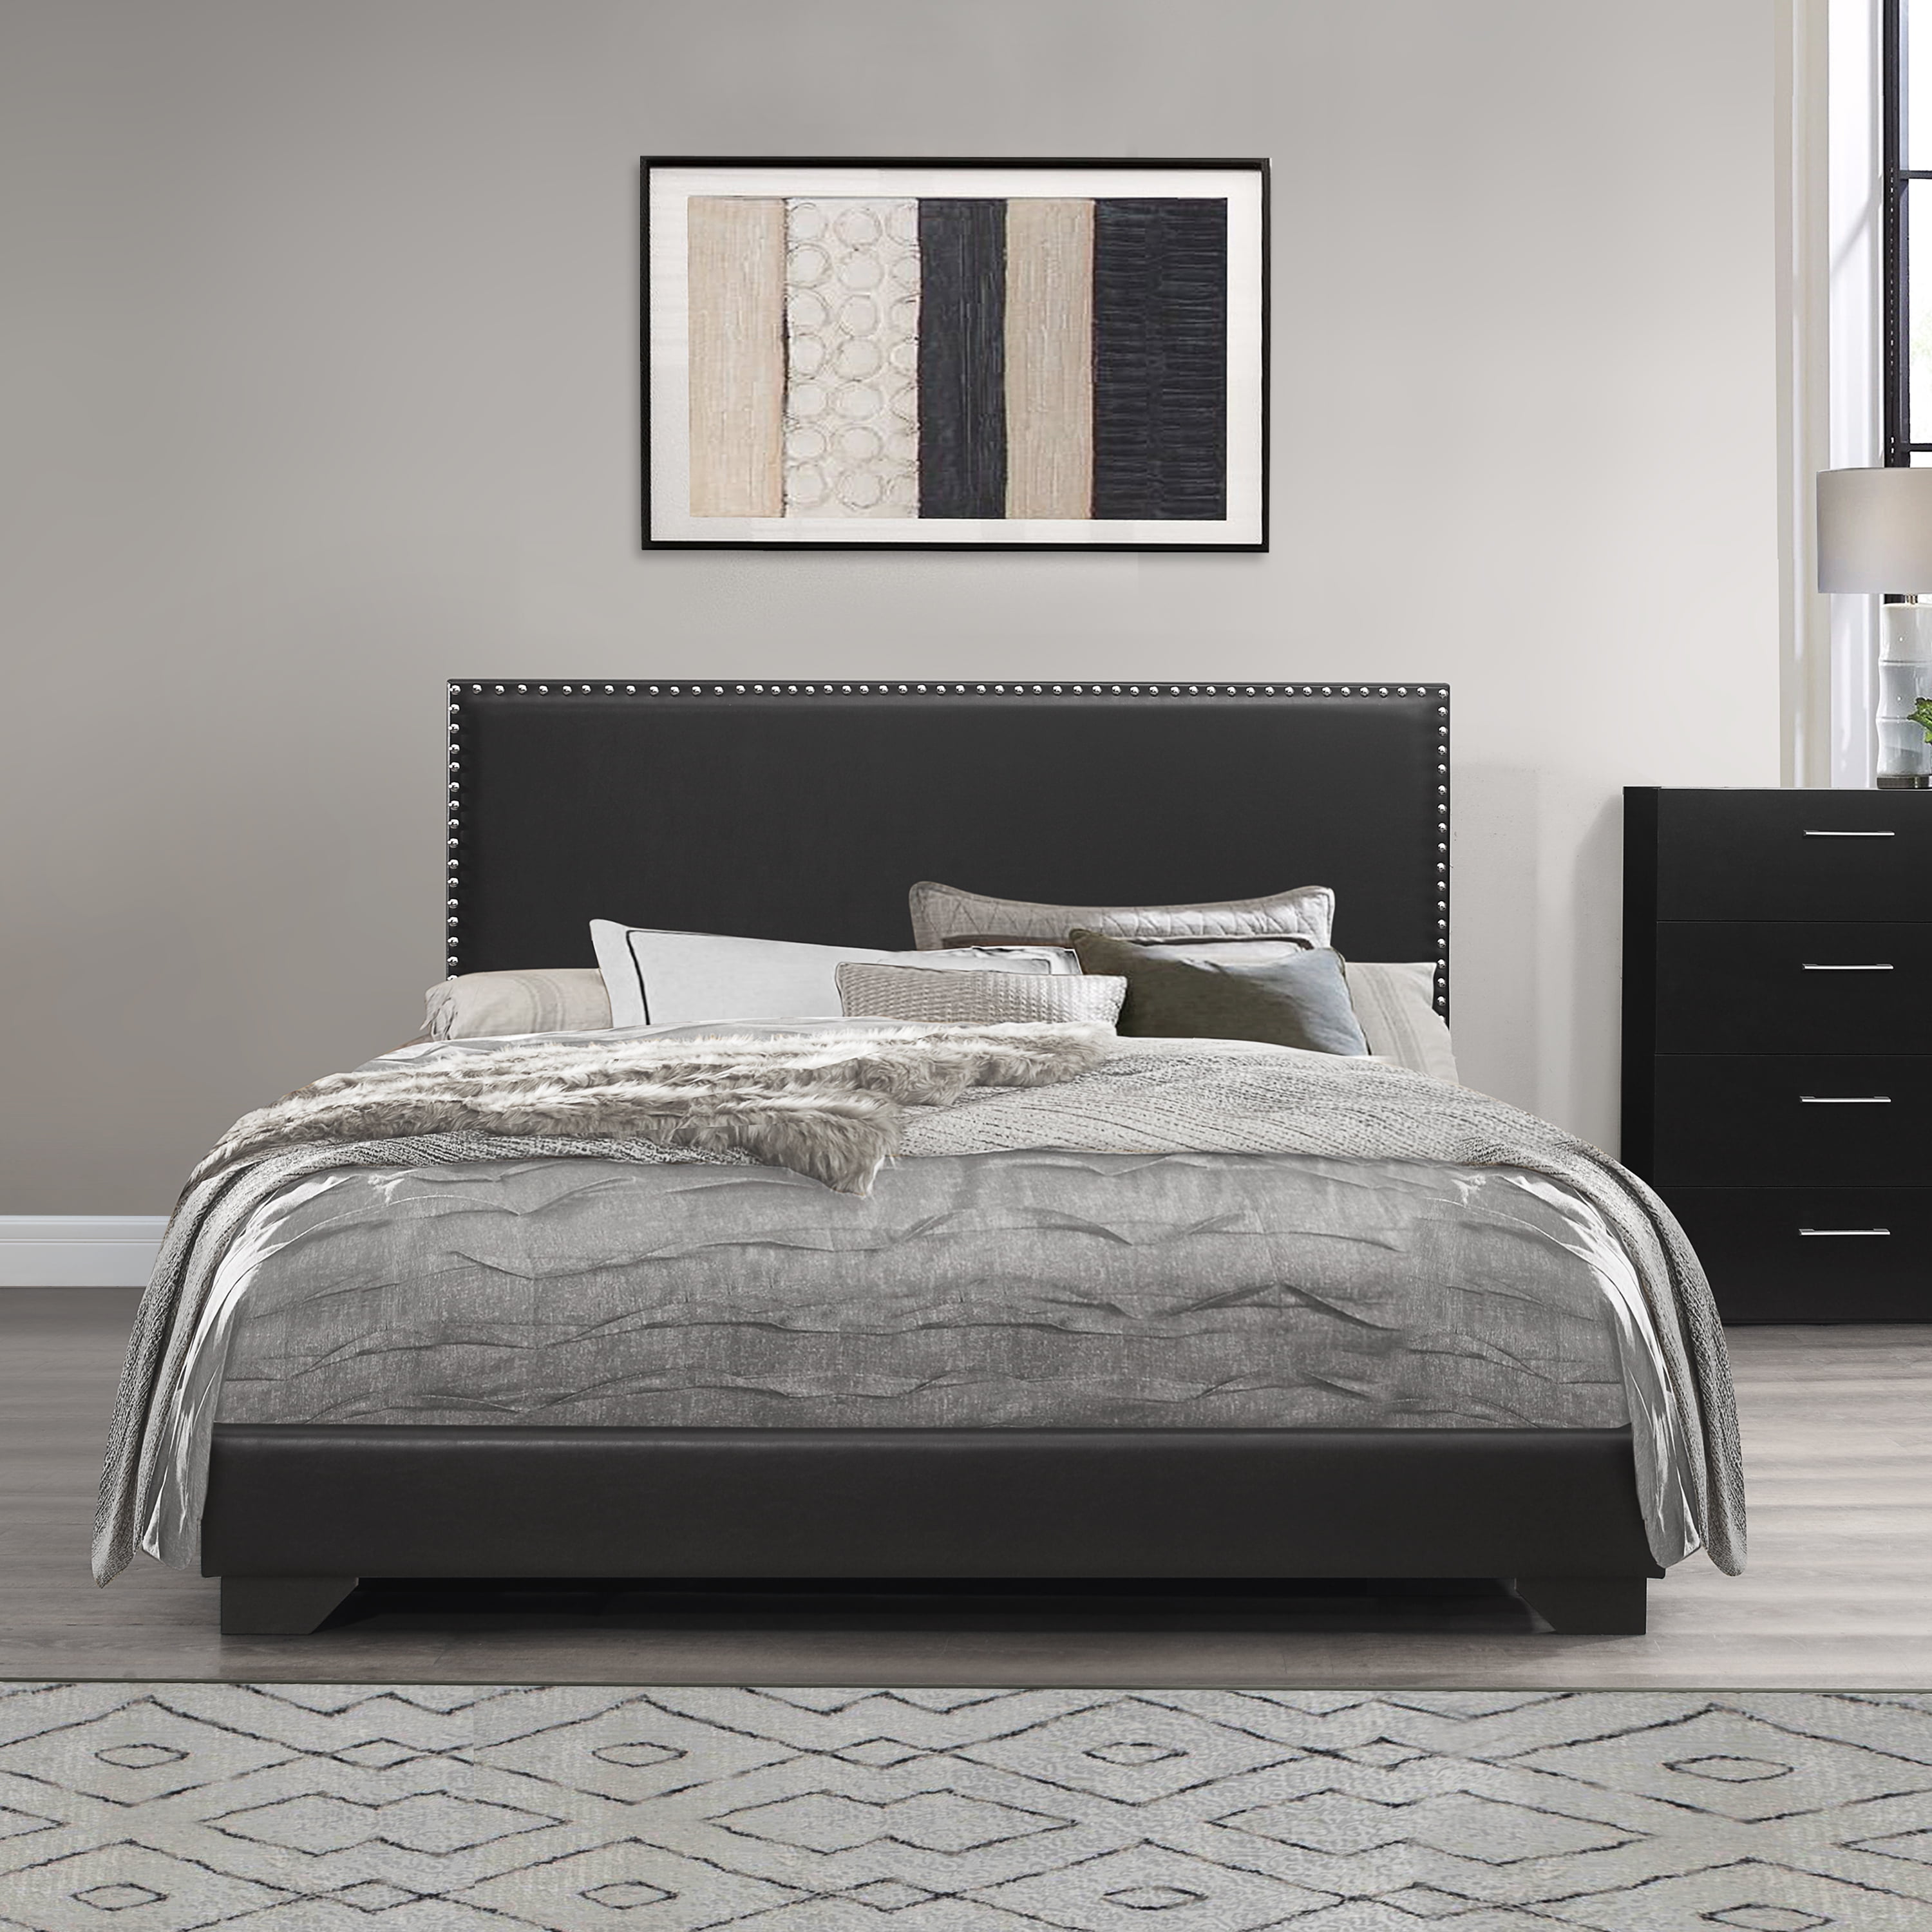 Black Faux Leather Upholstered Queen Bed with Nailhead Trim